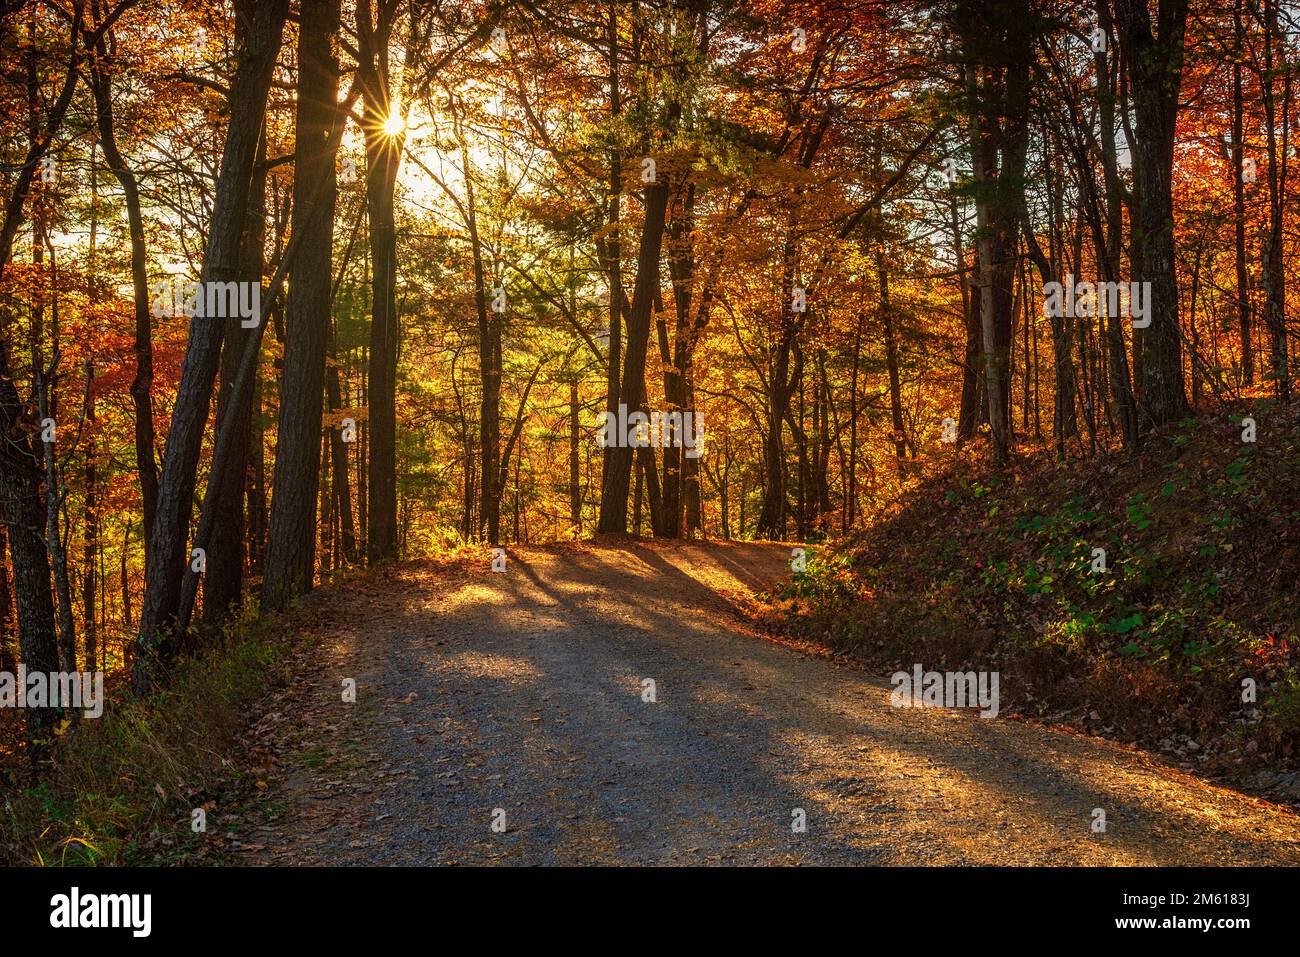 Sun shining through autumn forest in Great Smoky Mountain National Park in Tennessee Stock Photo